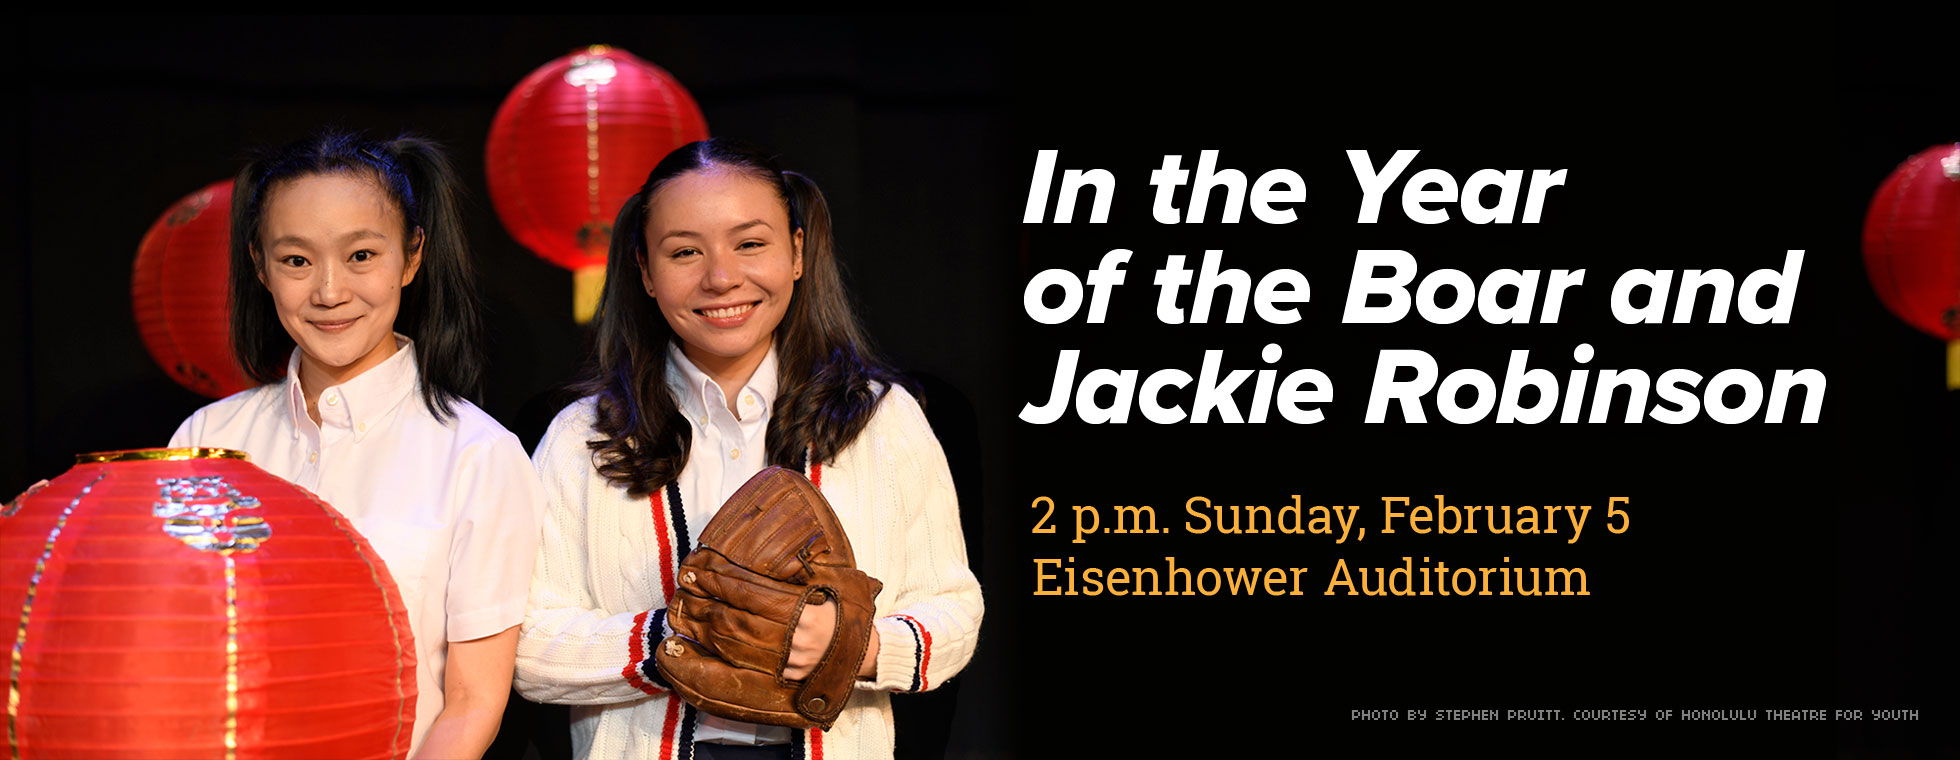 In the Year of the Boar and Jackie Robinson. 2 p.m. Sunday, February 5, 2023 at Eisenhower Auditorium.